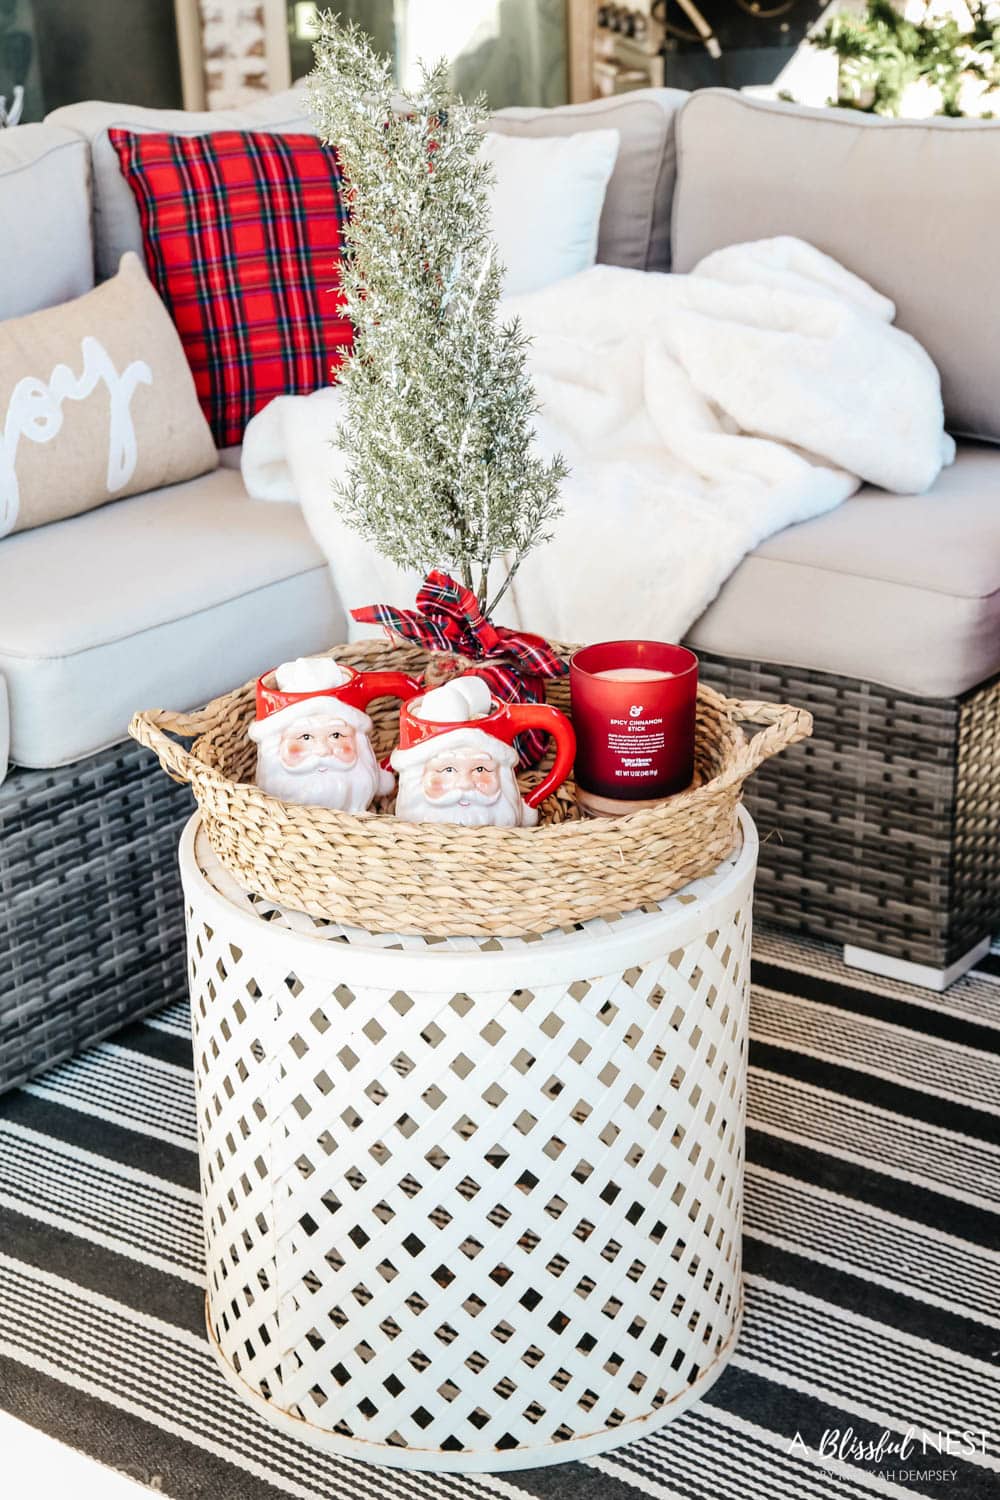 Easy and affordable holiday home decor ideas for any space. #ABlissfulNest #christmasdecor #christmas